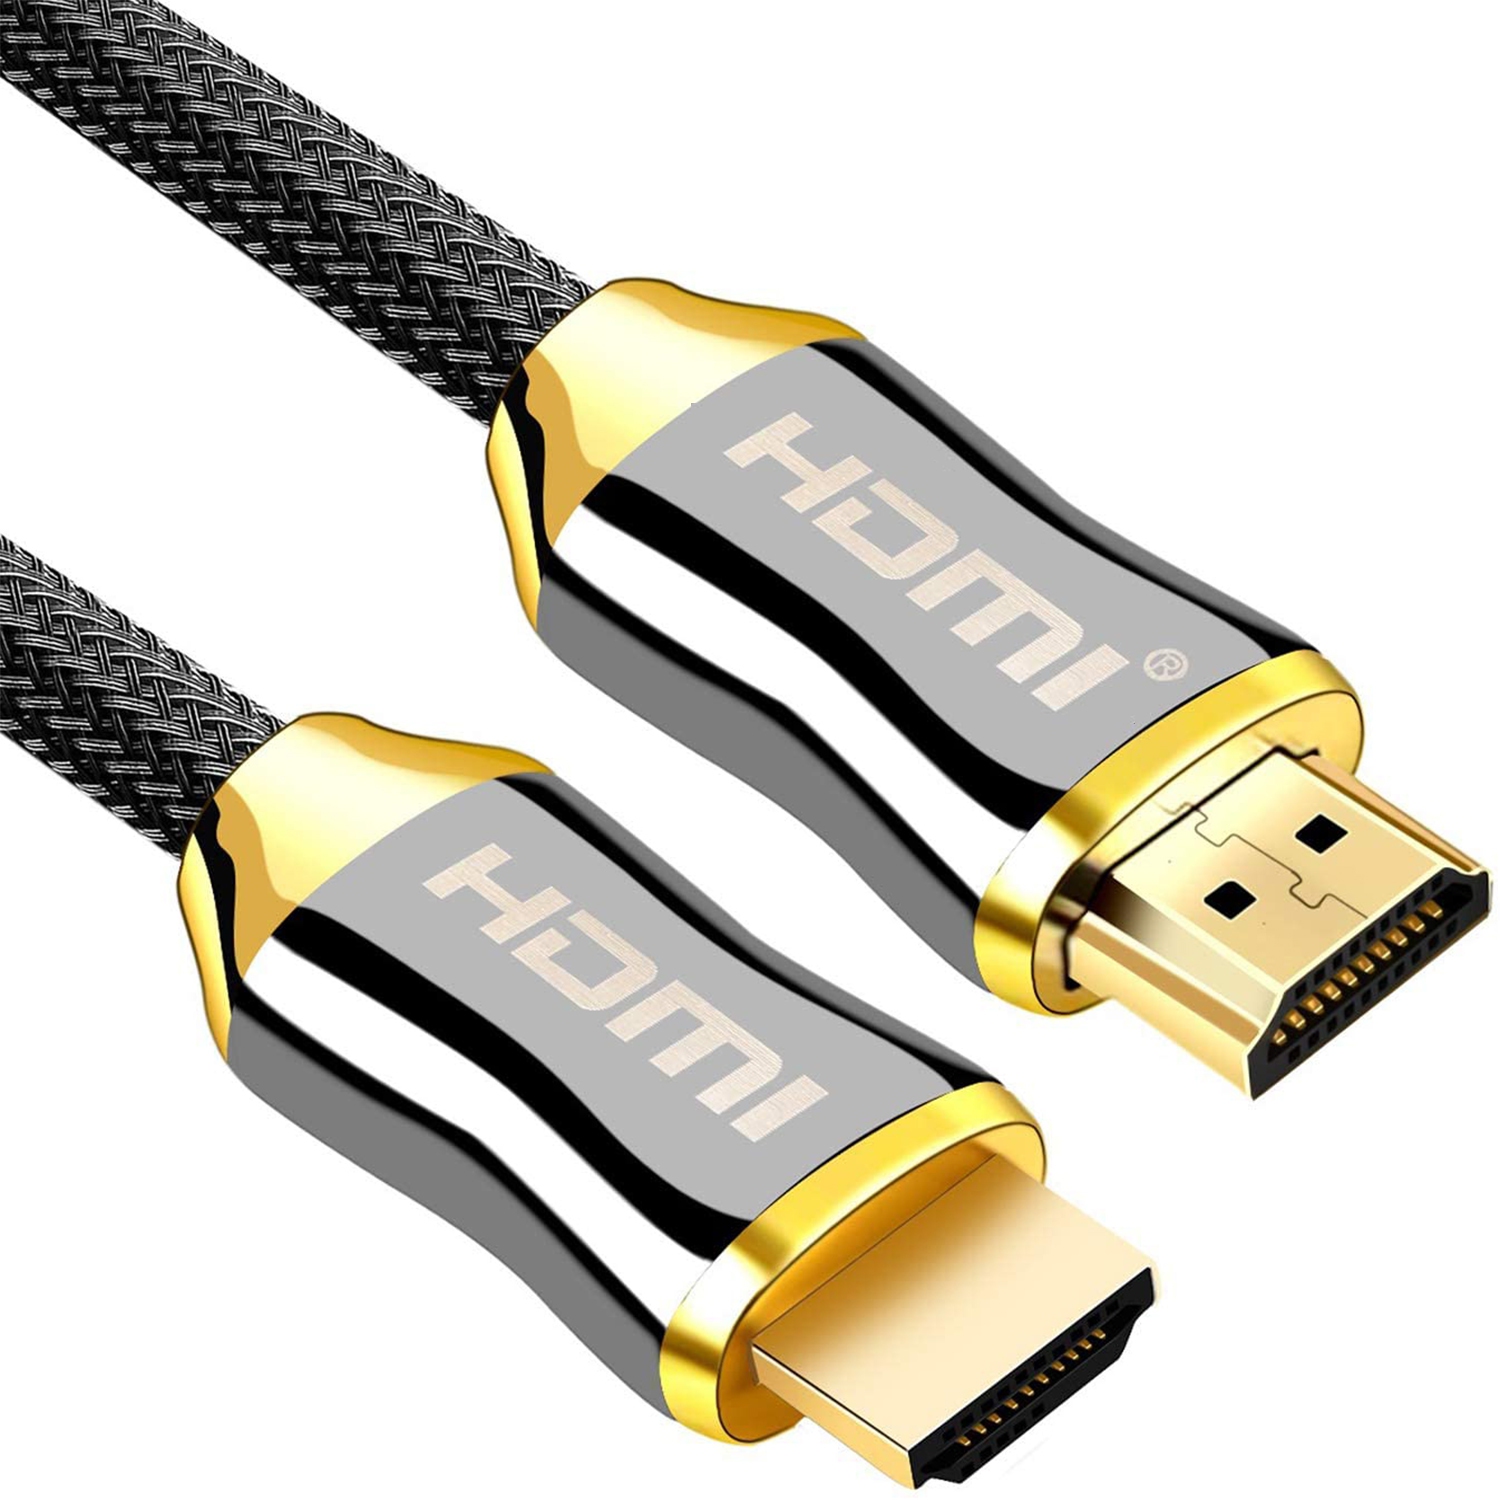 ISTAR 4K HDMI Cable 24Gpbs High Speed Cable to HDMI 2.0 Supports 1080p, 3D, 2160p, 4K 60Hz UHD, HDR,CL3 for in-Wall Installation,28AWG Braided for HDTV, Xbox, Blue-ray Player, PS3, PS4, PC (1M / 3ft)